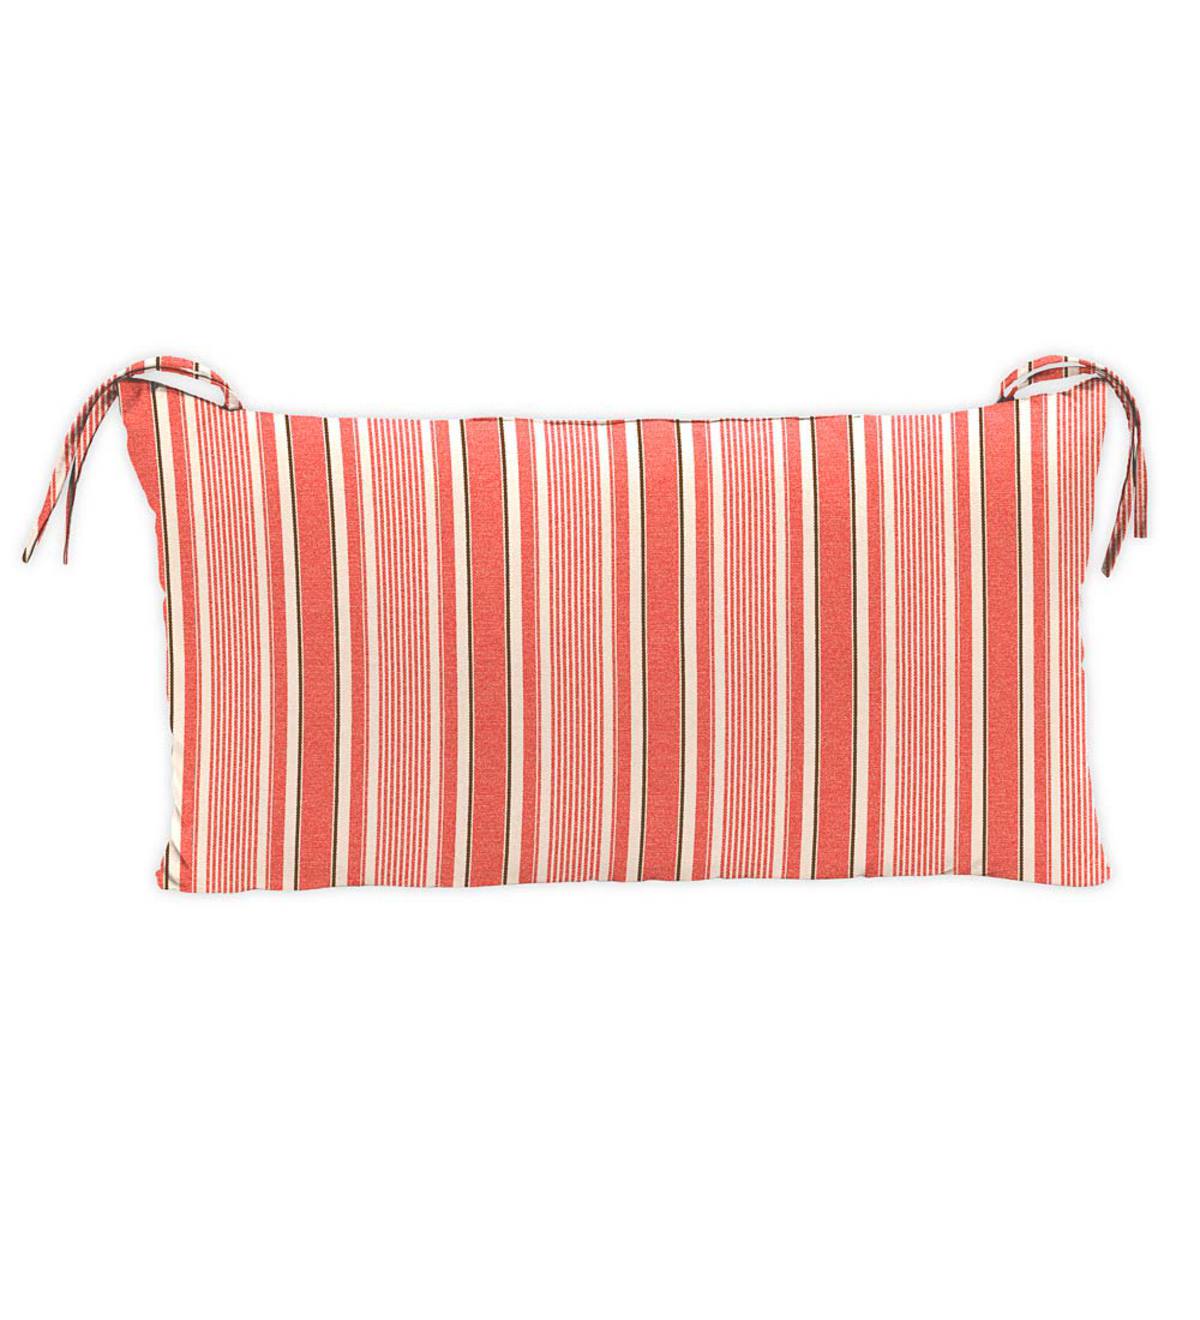 Sale! Polyester Classic Headrest Pillow With Ties, 15”x 8”x 4½” - Coral Stripe